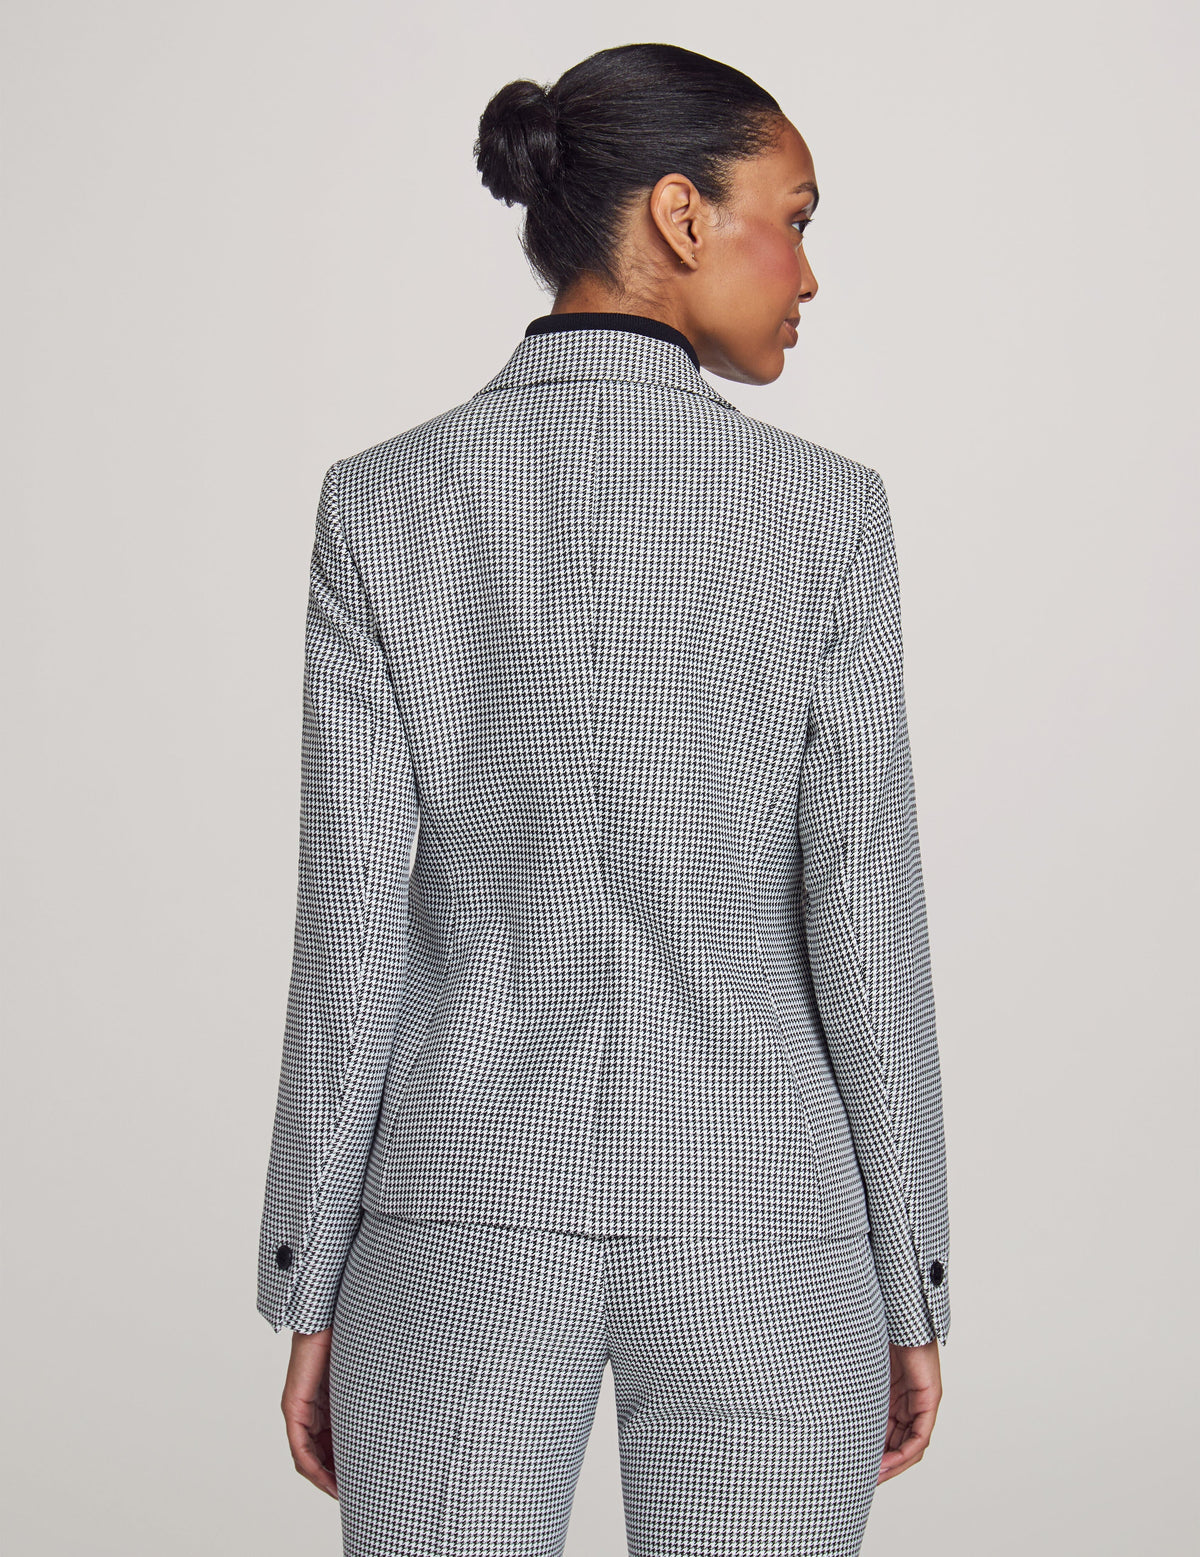 Anne Klein  Executive Collection 3-Pc. Mini Houndstooth Suit Set